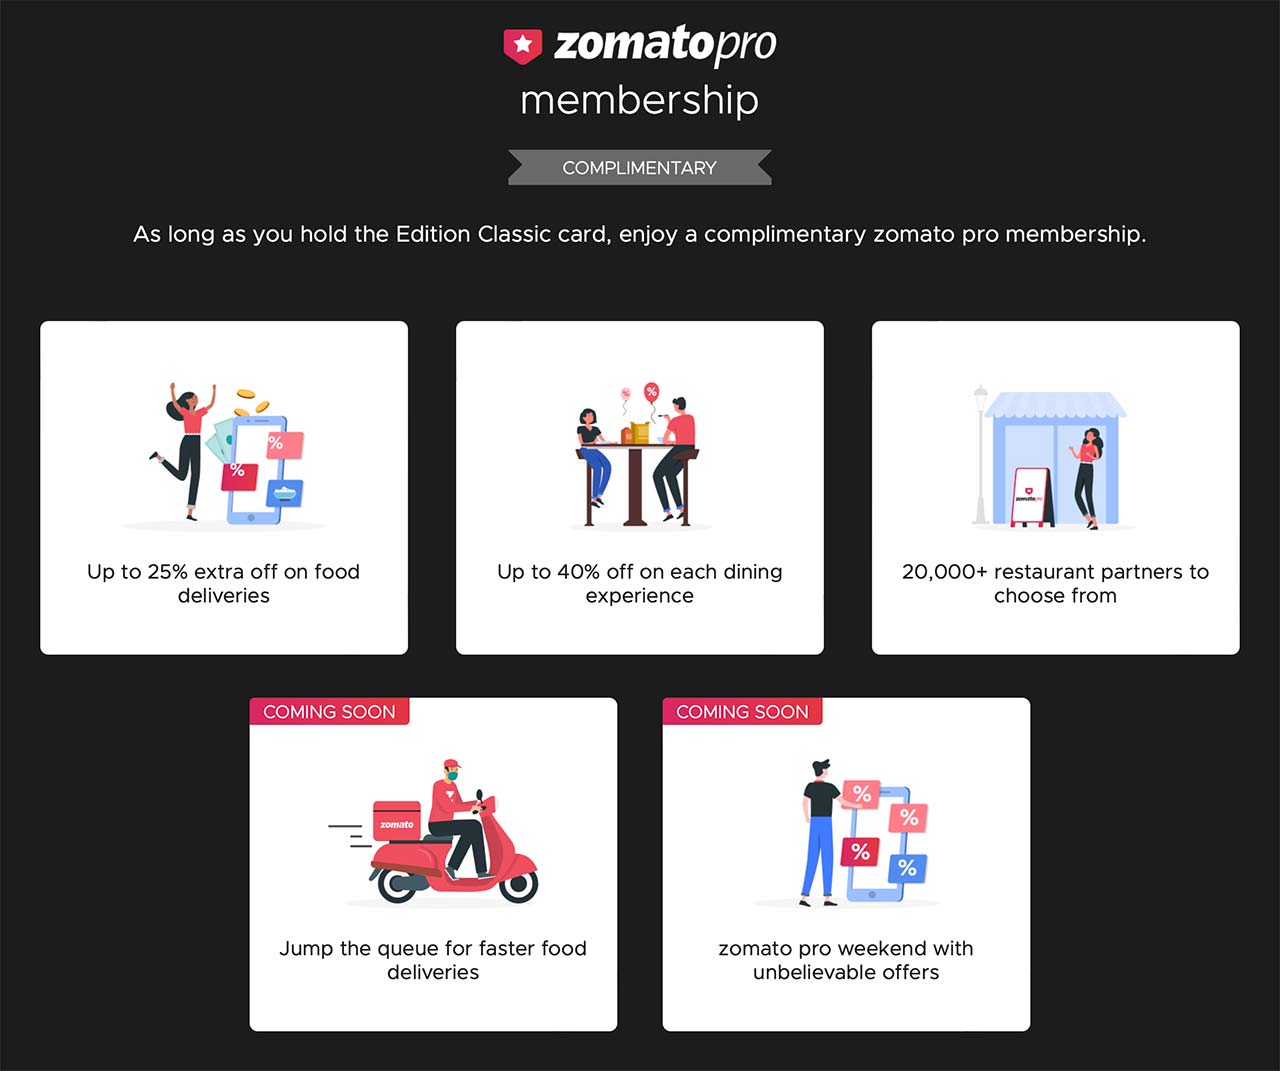 Zomato announces invite-only unlimited free delivery subscription service  Zomato Pro Plus, here's how to check for the invite - Times of India